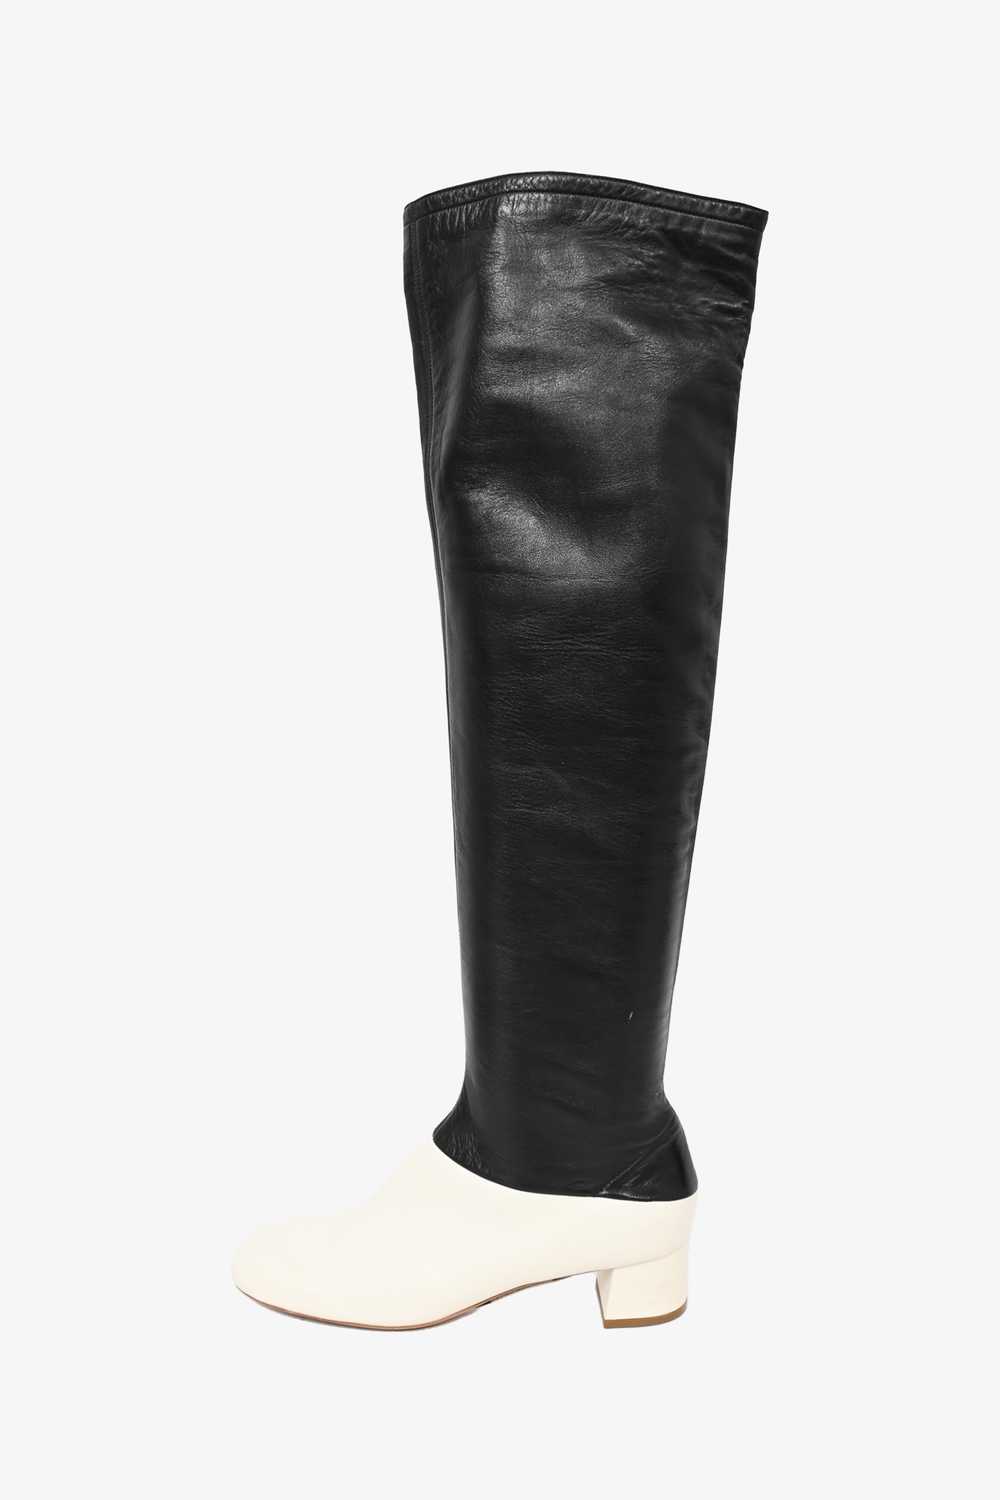 Celine Black/White Leather Knee High Boots Size 36 - image 3